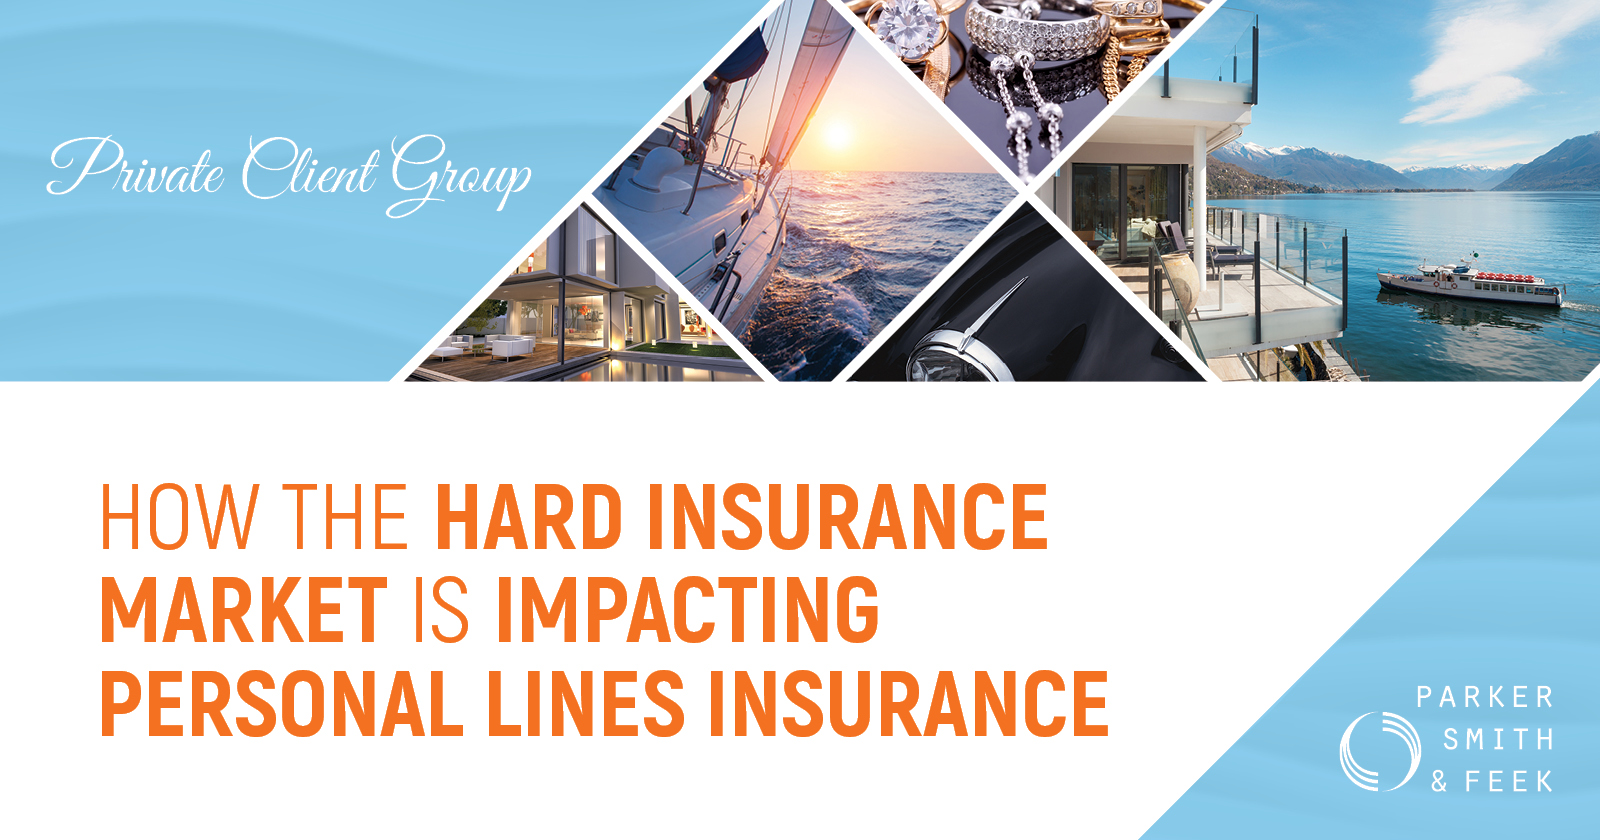 How the Hard Insurance Market is Impacting Personal Lines Insurance